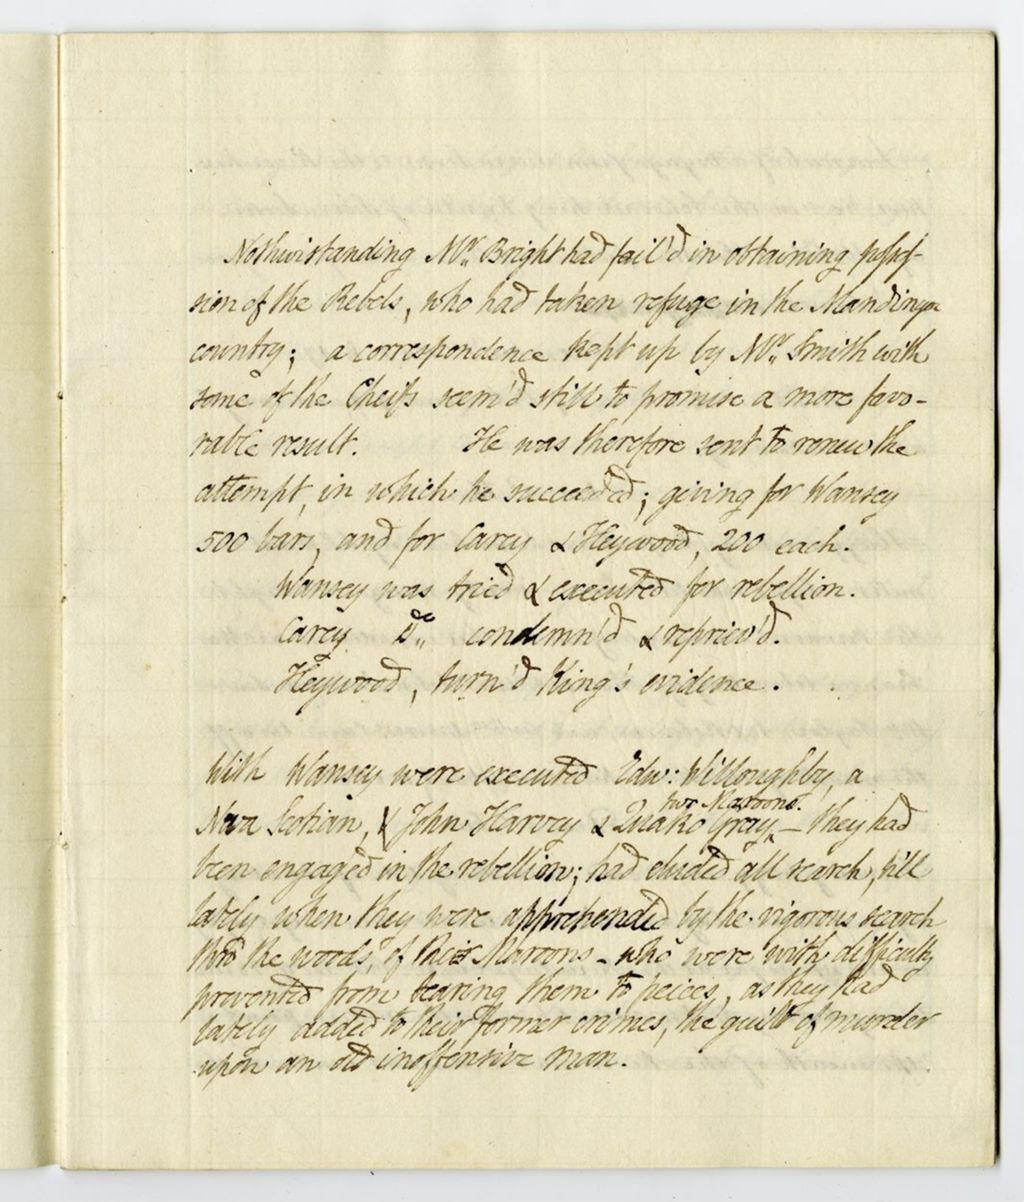 Extract from the journal of a voyage from Sierra Leone to the River Kisi Kisi, 1802